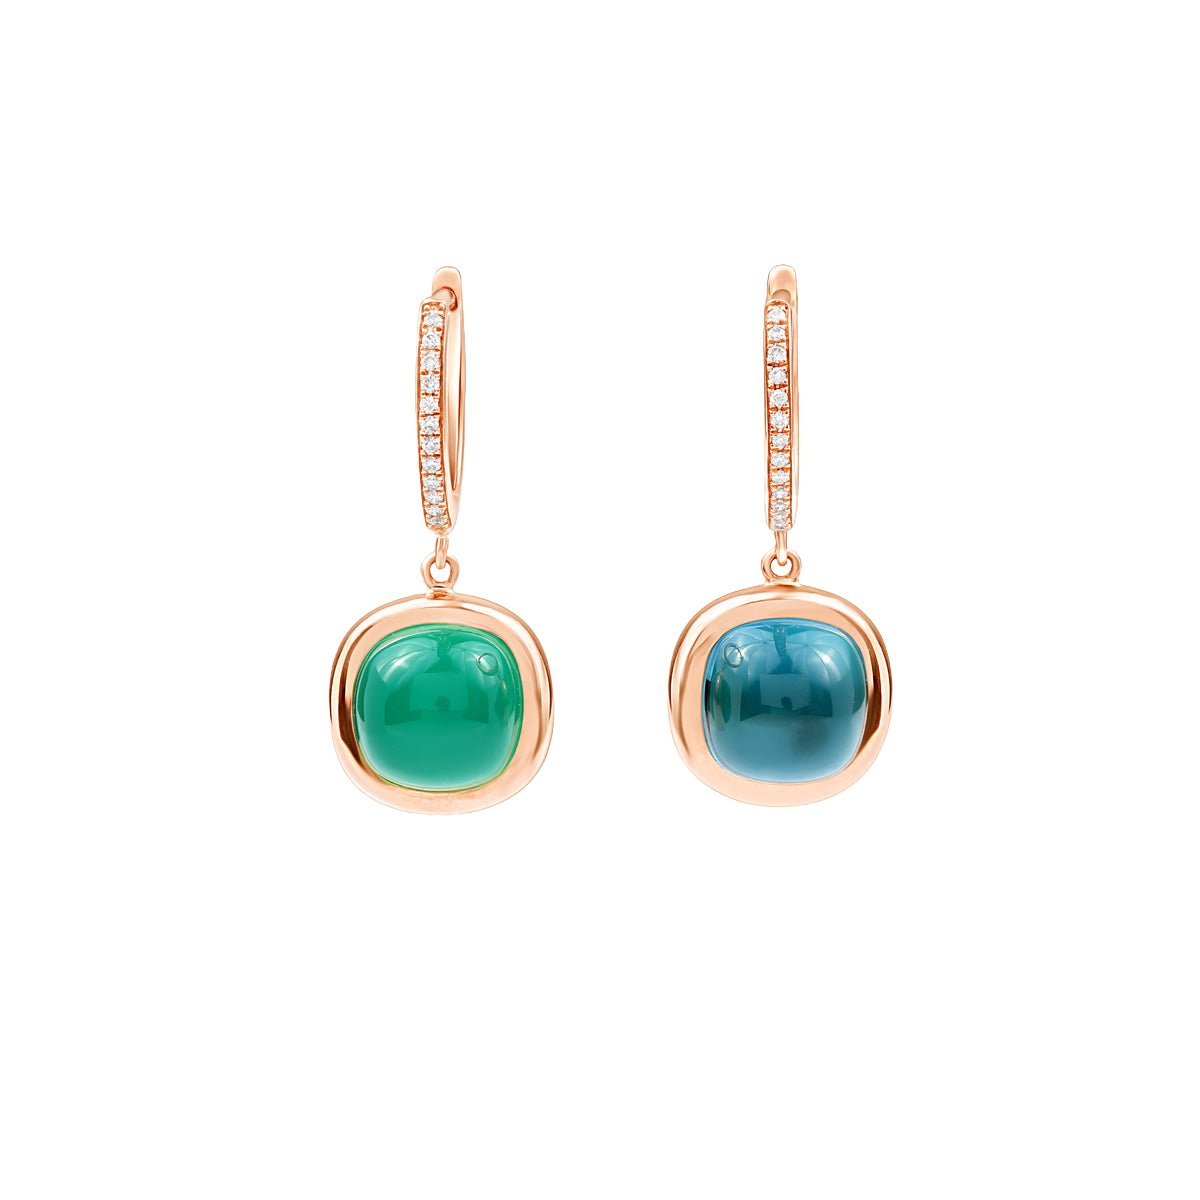 Reversible Bezel Set Green Agate and Blue Topaz Diamond Hoops Earrings Estella Collection #product_description# 14k Agate Birthstone #tag4# #tag5# #tag6# #tag7# #tag8# #tag9# #tag10#